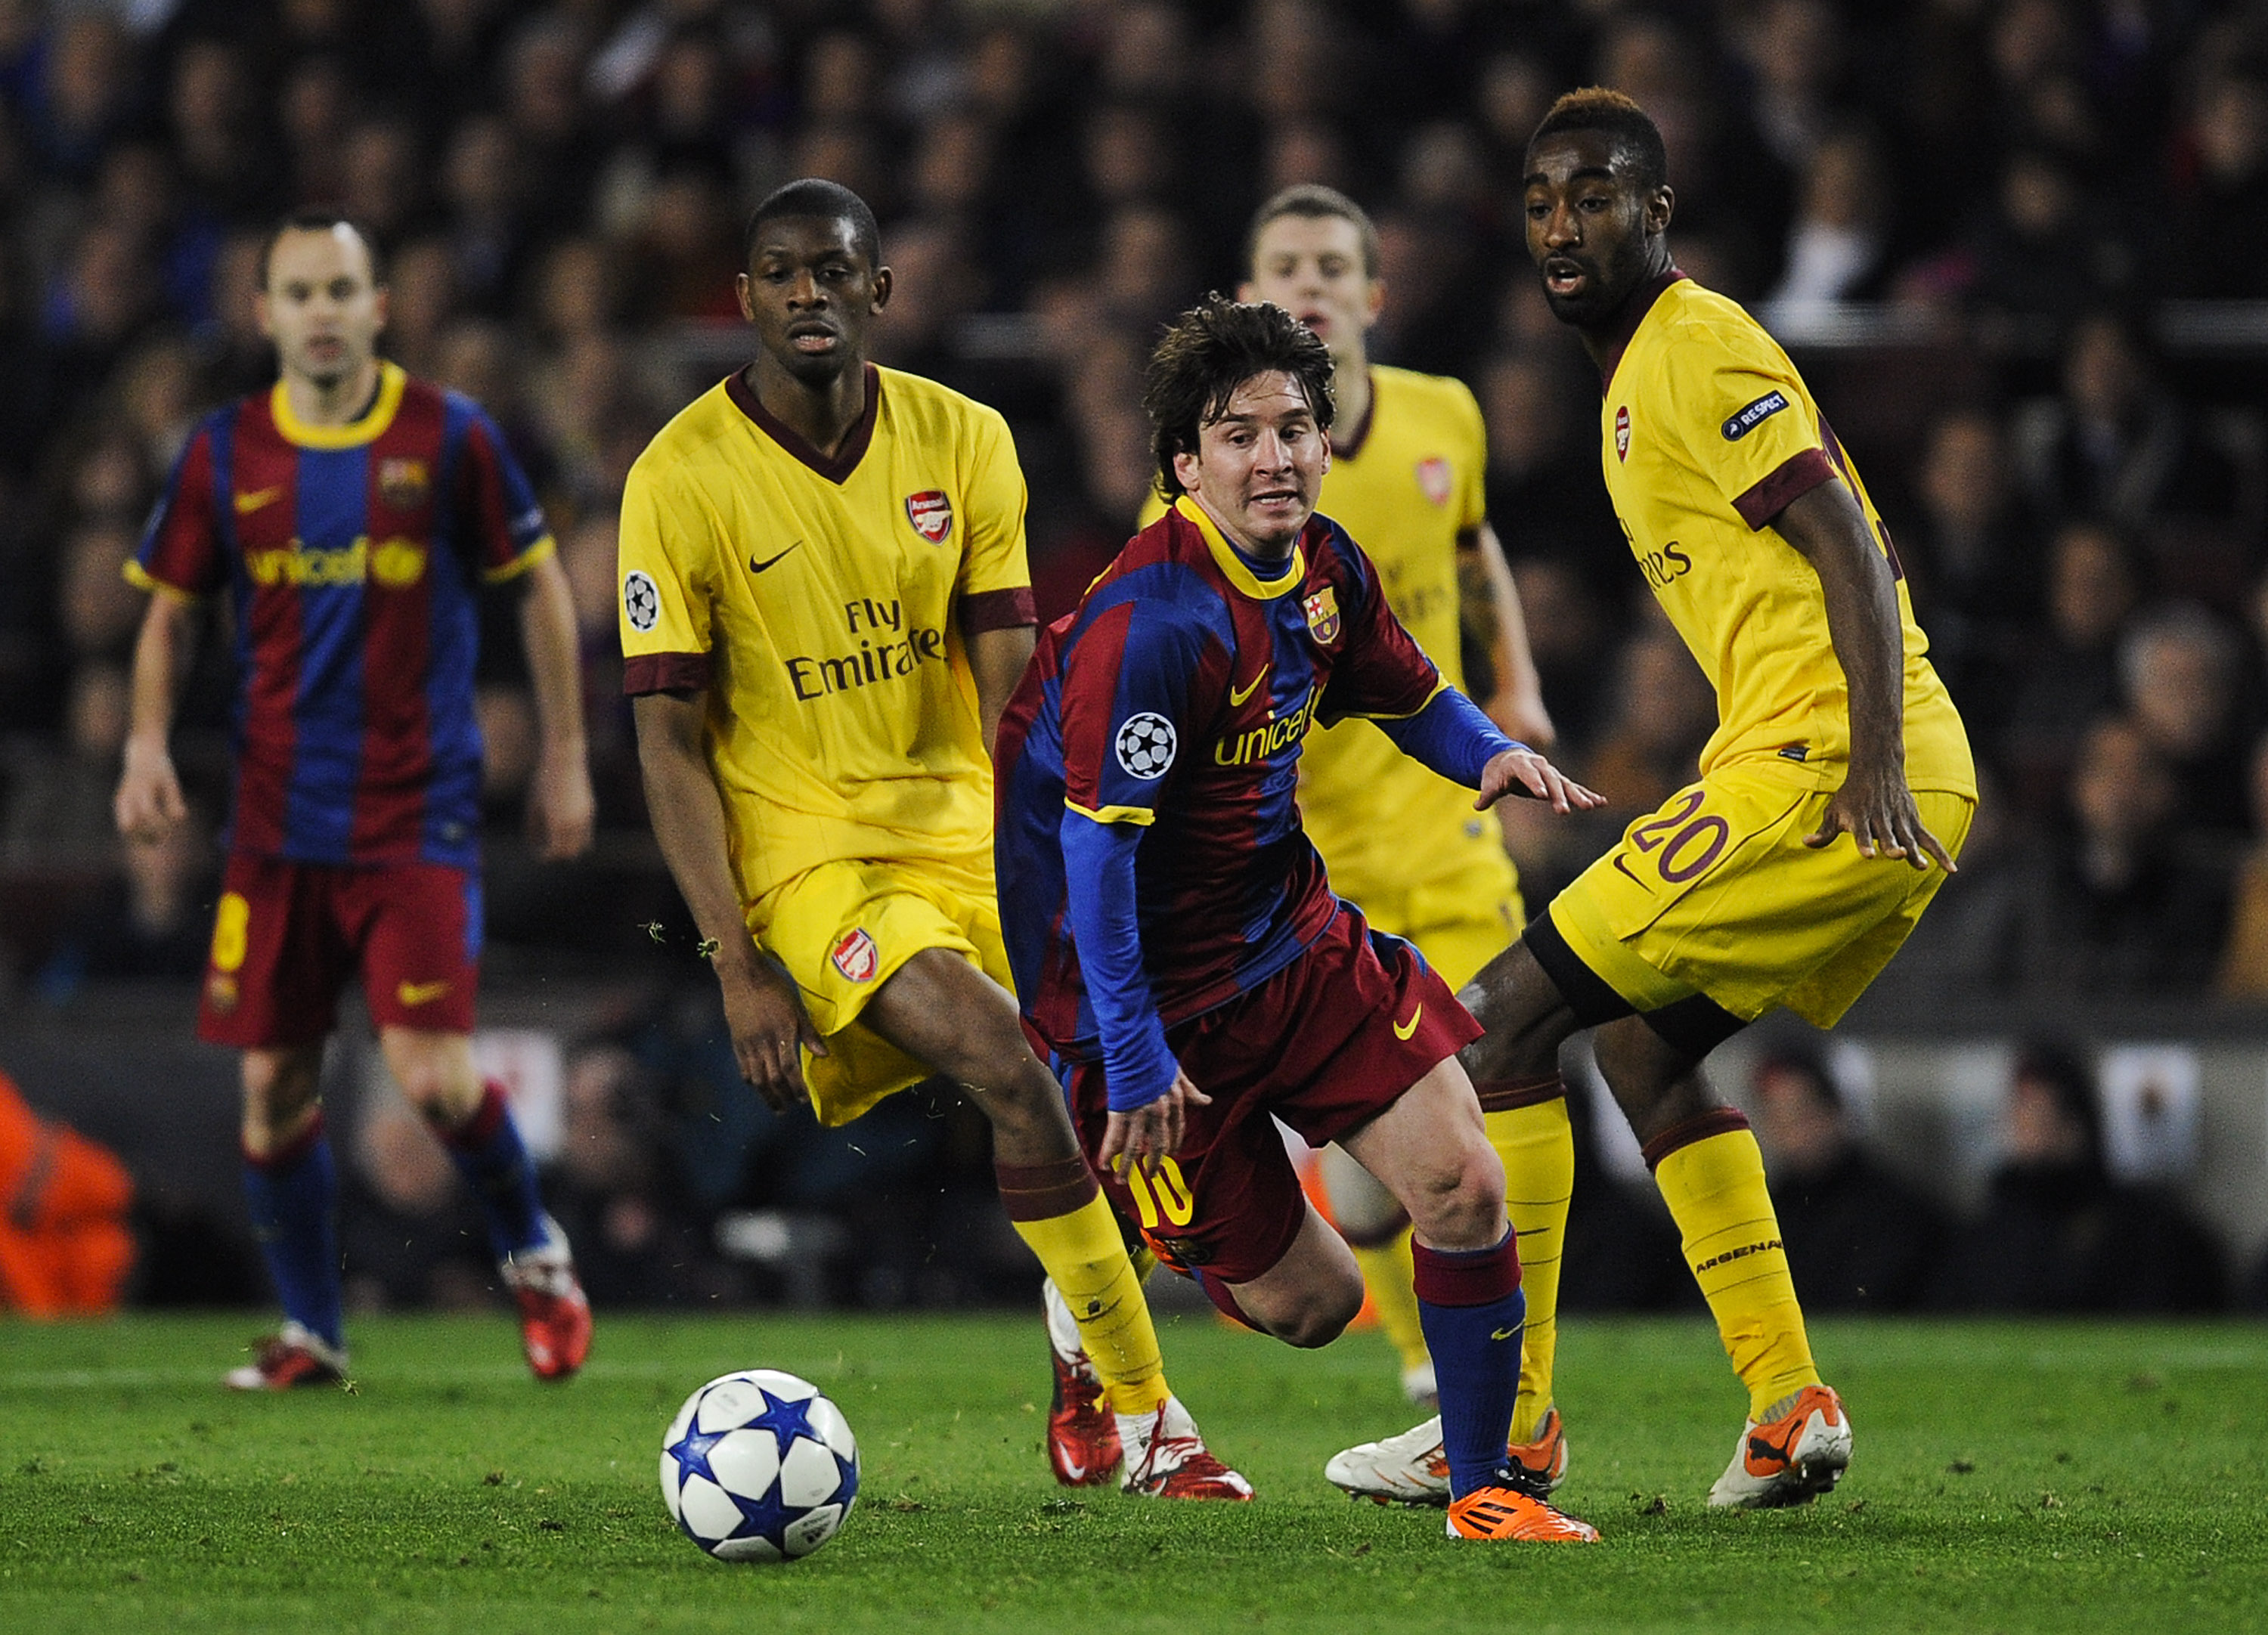 BARCELONA, SPAIN - MARCH 08:  Lionel Messi of FC Barcelona (C) runs with the balls under a challenge by Abou Diaby (L) and Johan Djourou (R) of Arsenal during the UEFA Champions League round of 16 second leg match between Barcelona and Arsenal at the Camp